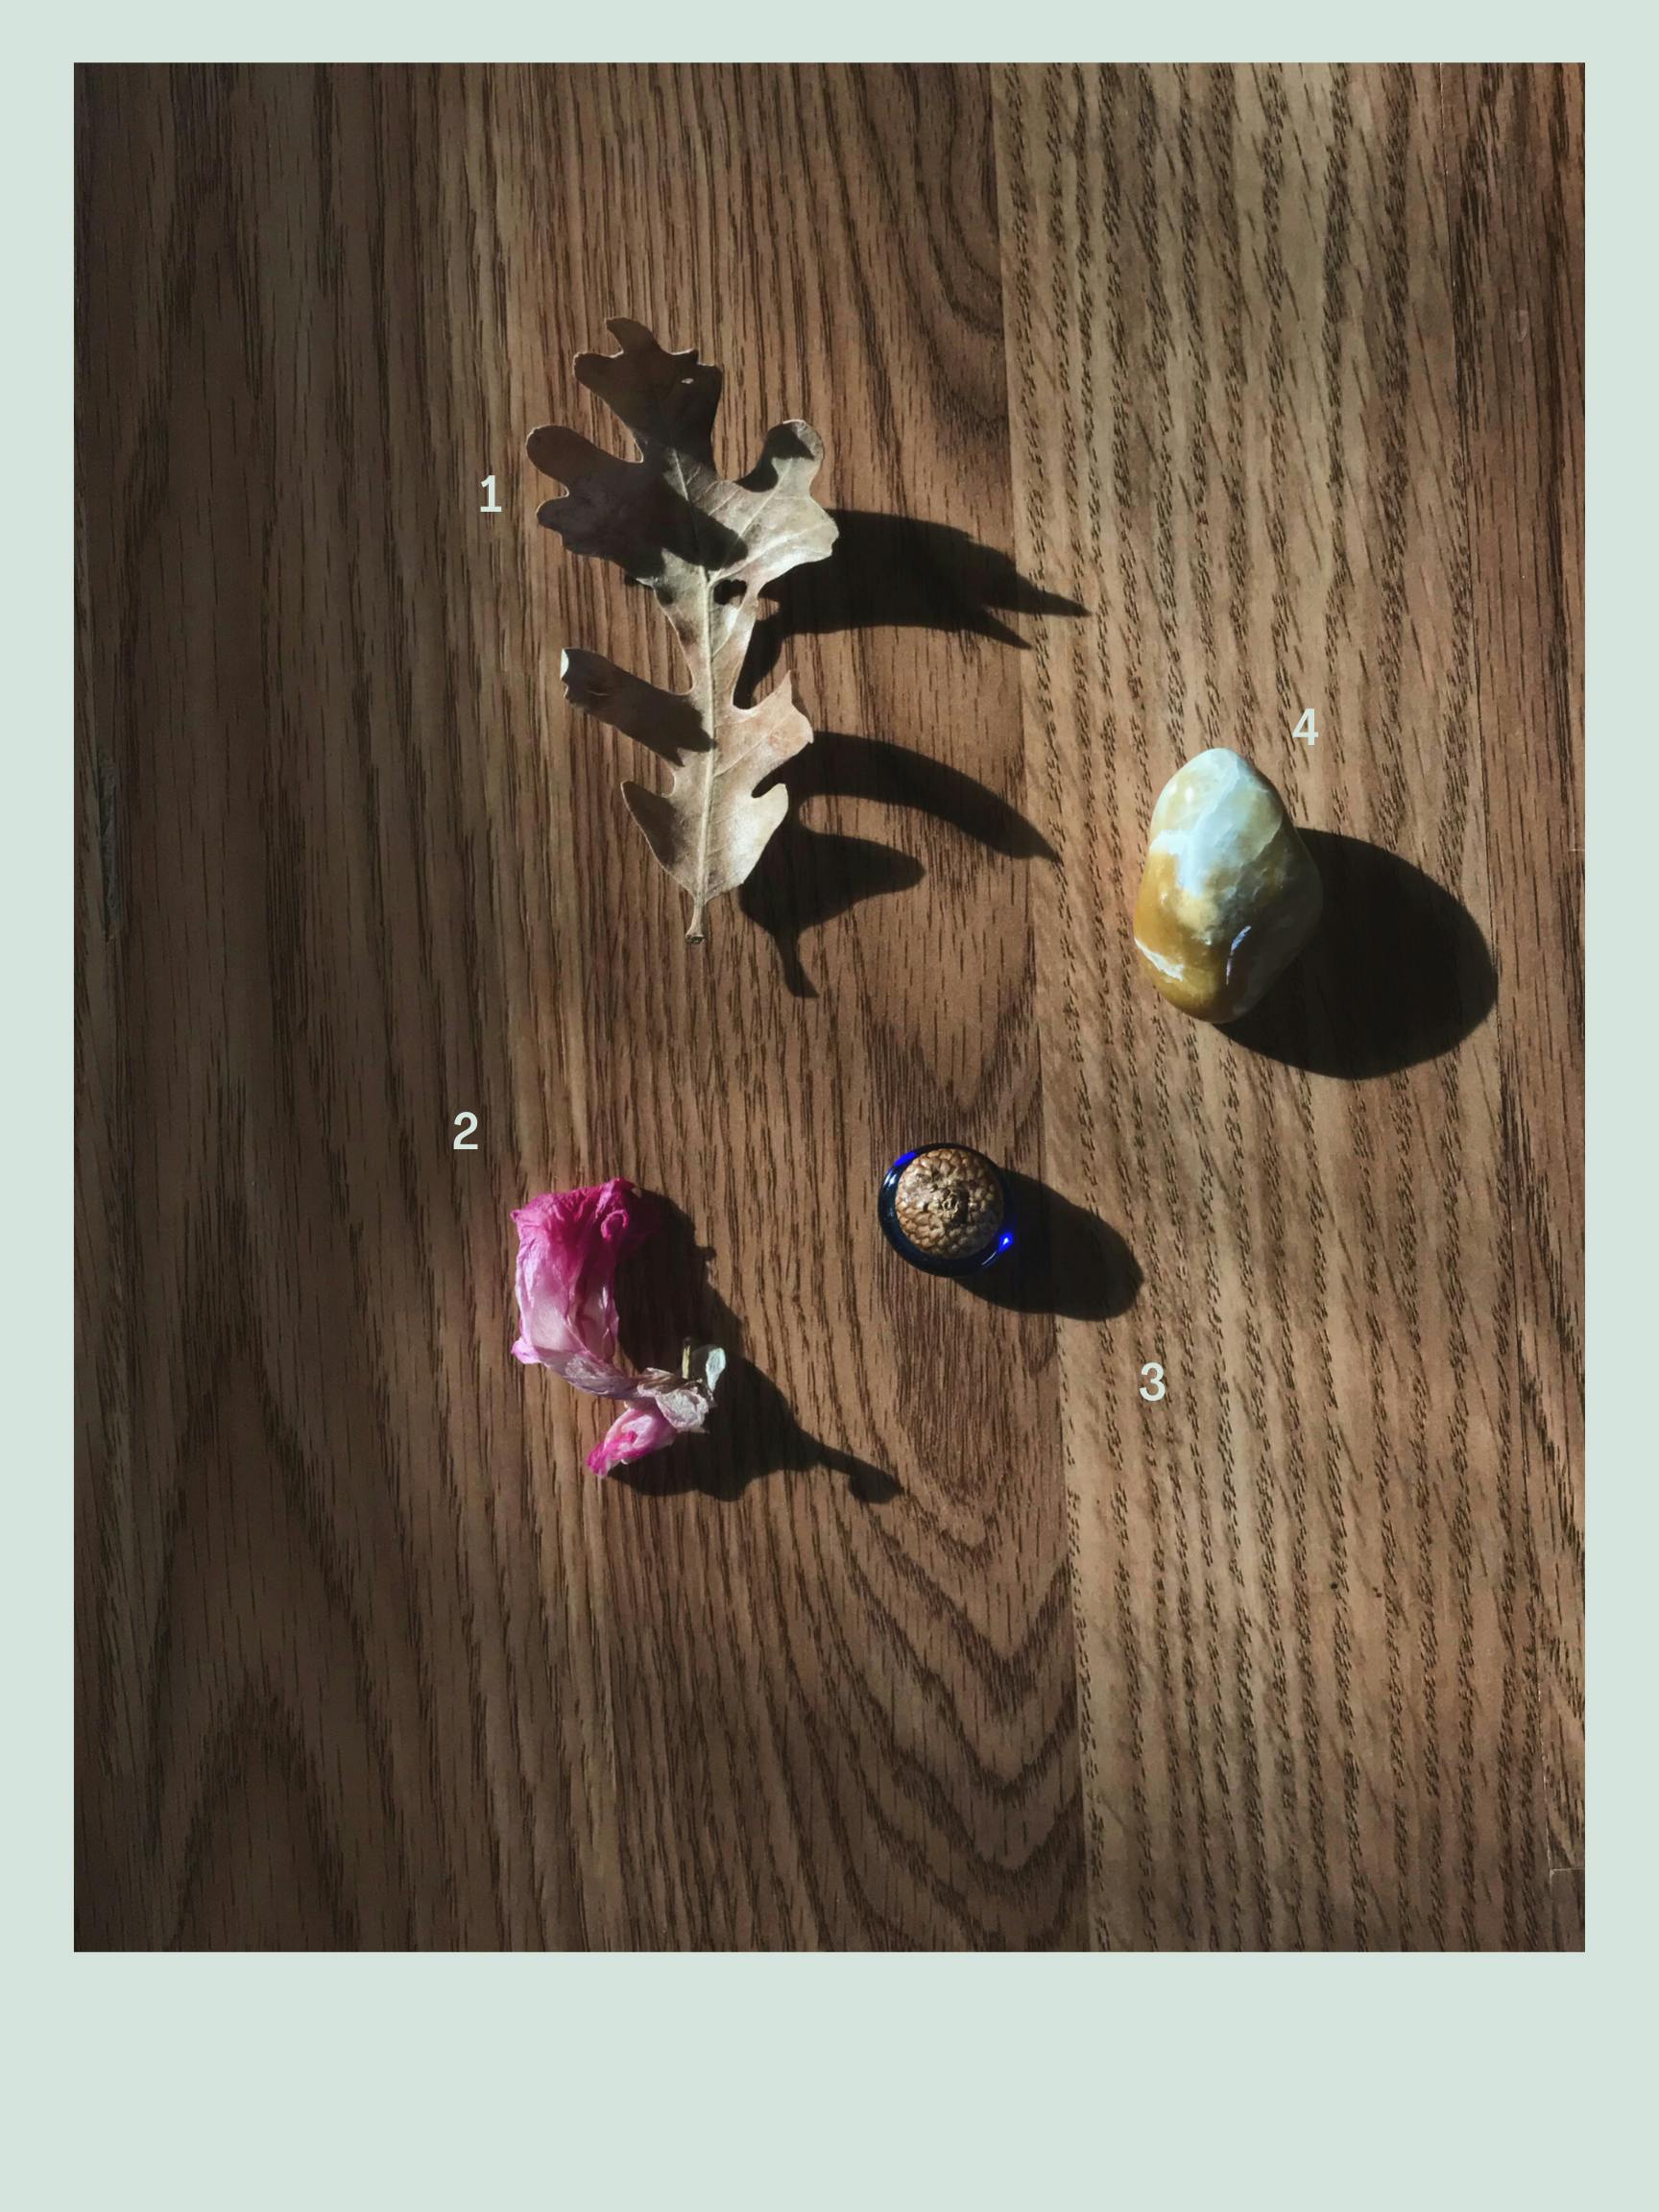 A collection of objects, labeled with small numbers, sits on a desk. From left to right, a dried oak leaf, a dried pink christmas cactus blossom, a blue marble with an acorn cap attached to it, and a white and orange rock that's been through a rock tumbler.